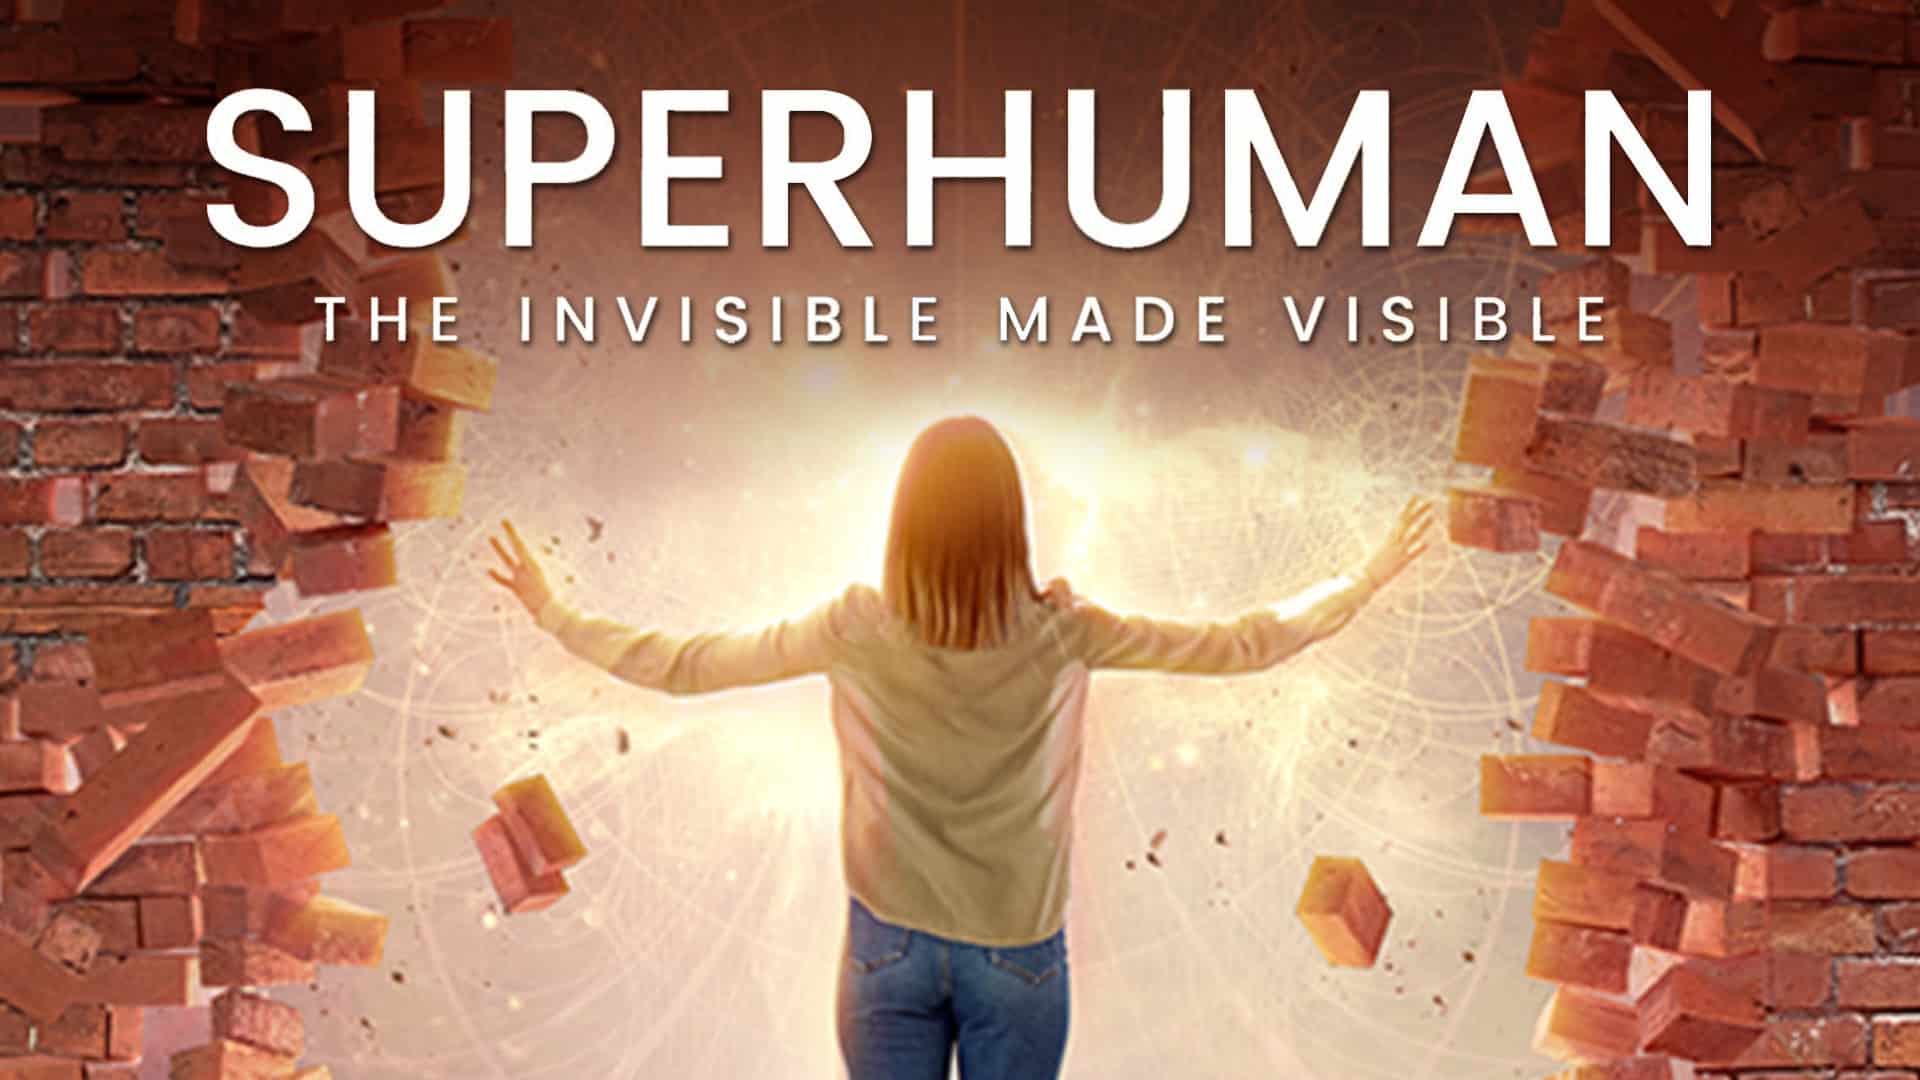 Promotional cover for the documentary 'SUPERHUMAN: The Invisible Made Visible' featuring a woman with outstretched arms, back facing the viewer, with a radiant light source in front of her, causing a brick wall to shatter and bricks to fly through the air, symbolizing the release or manifestation of powerful, unseen forces.